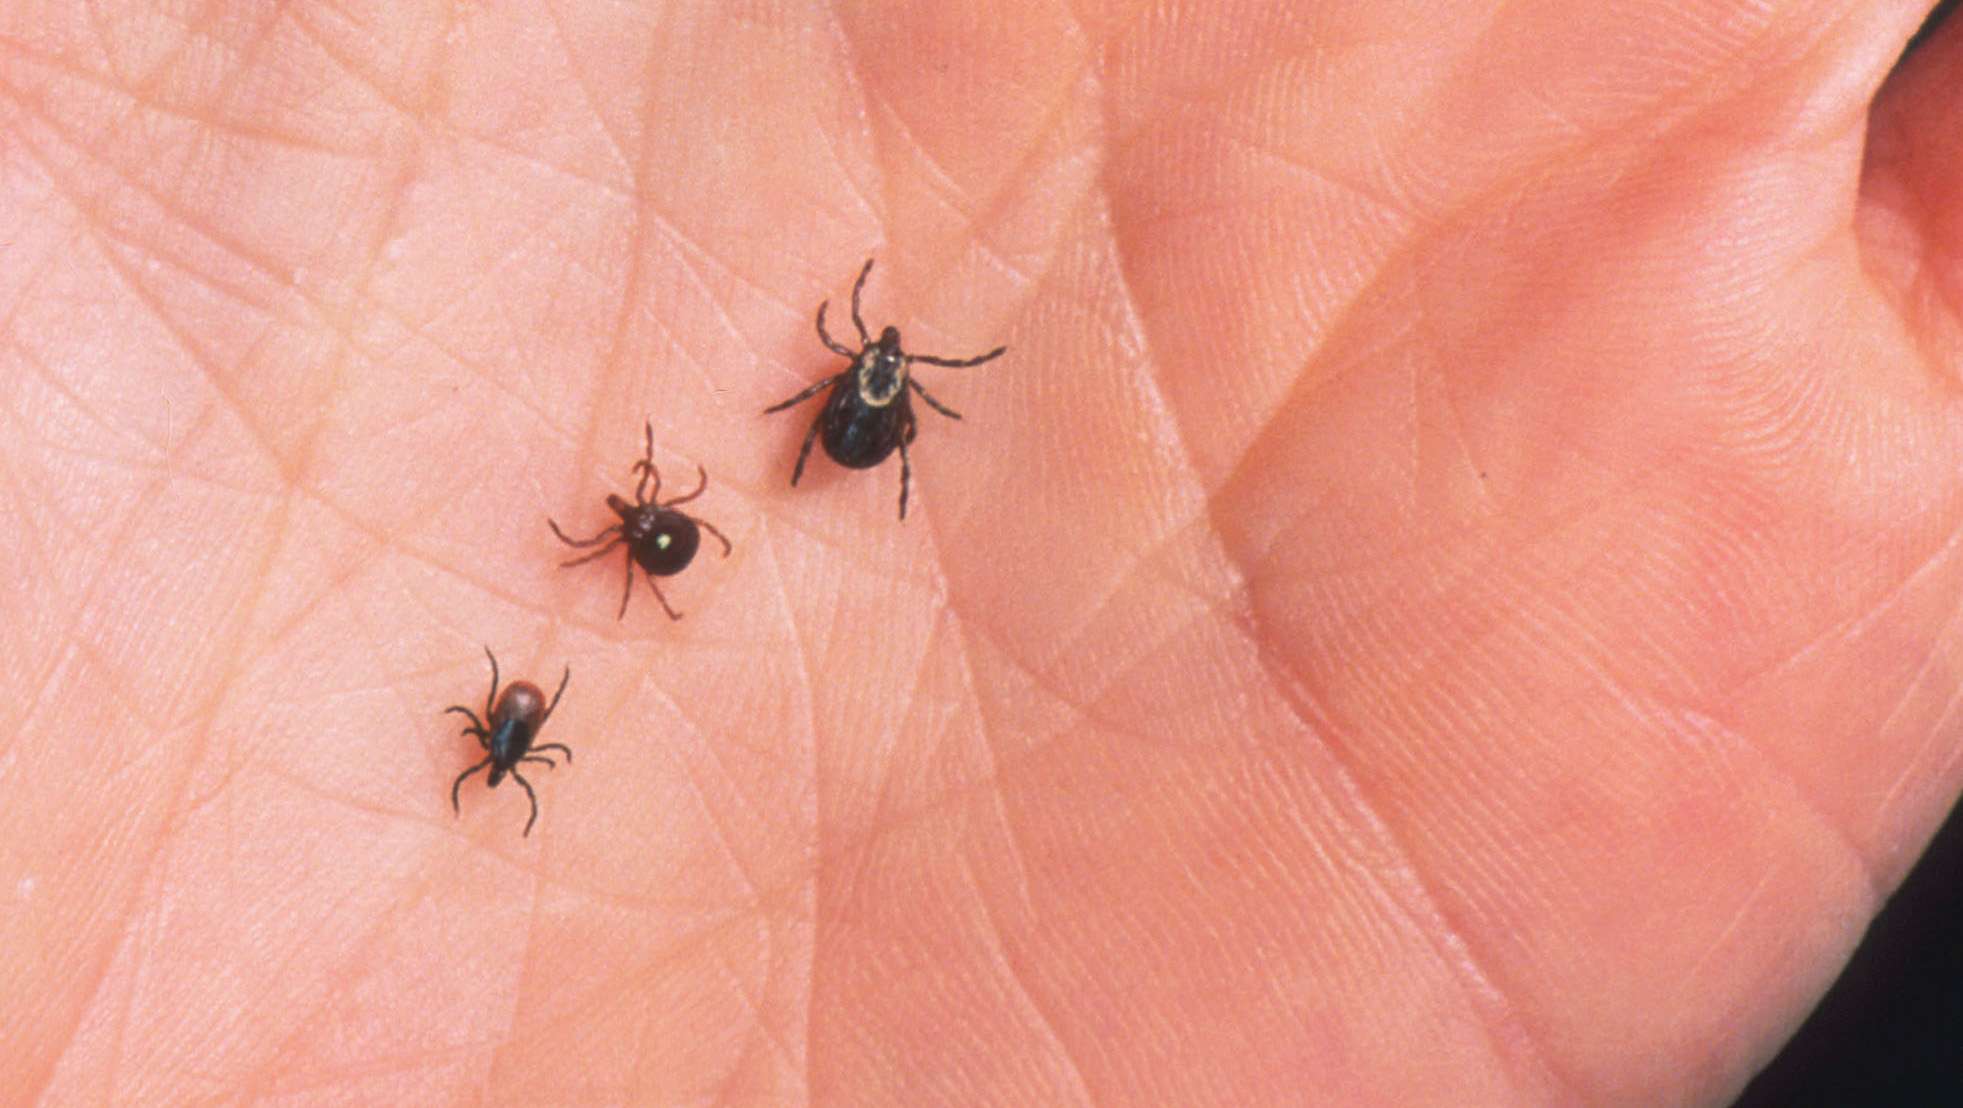 A tick bite can make you allergic to red meat